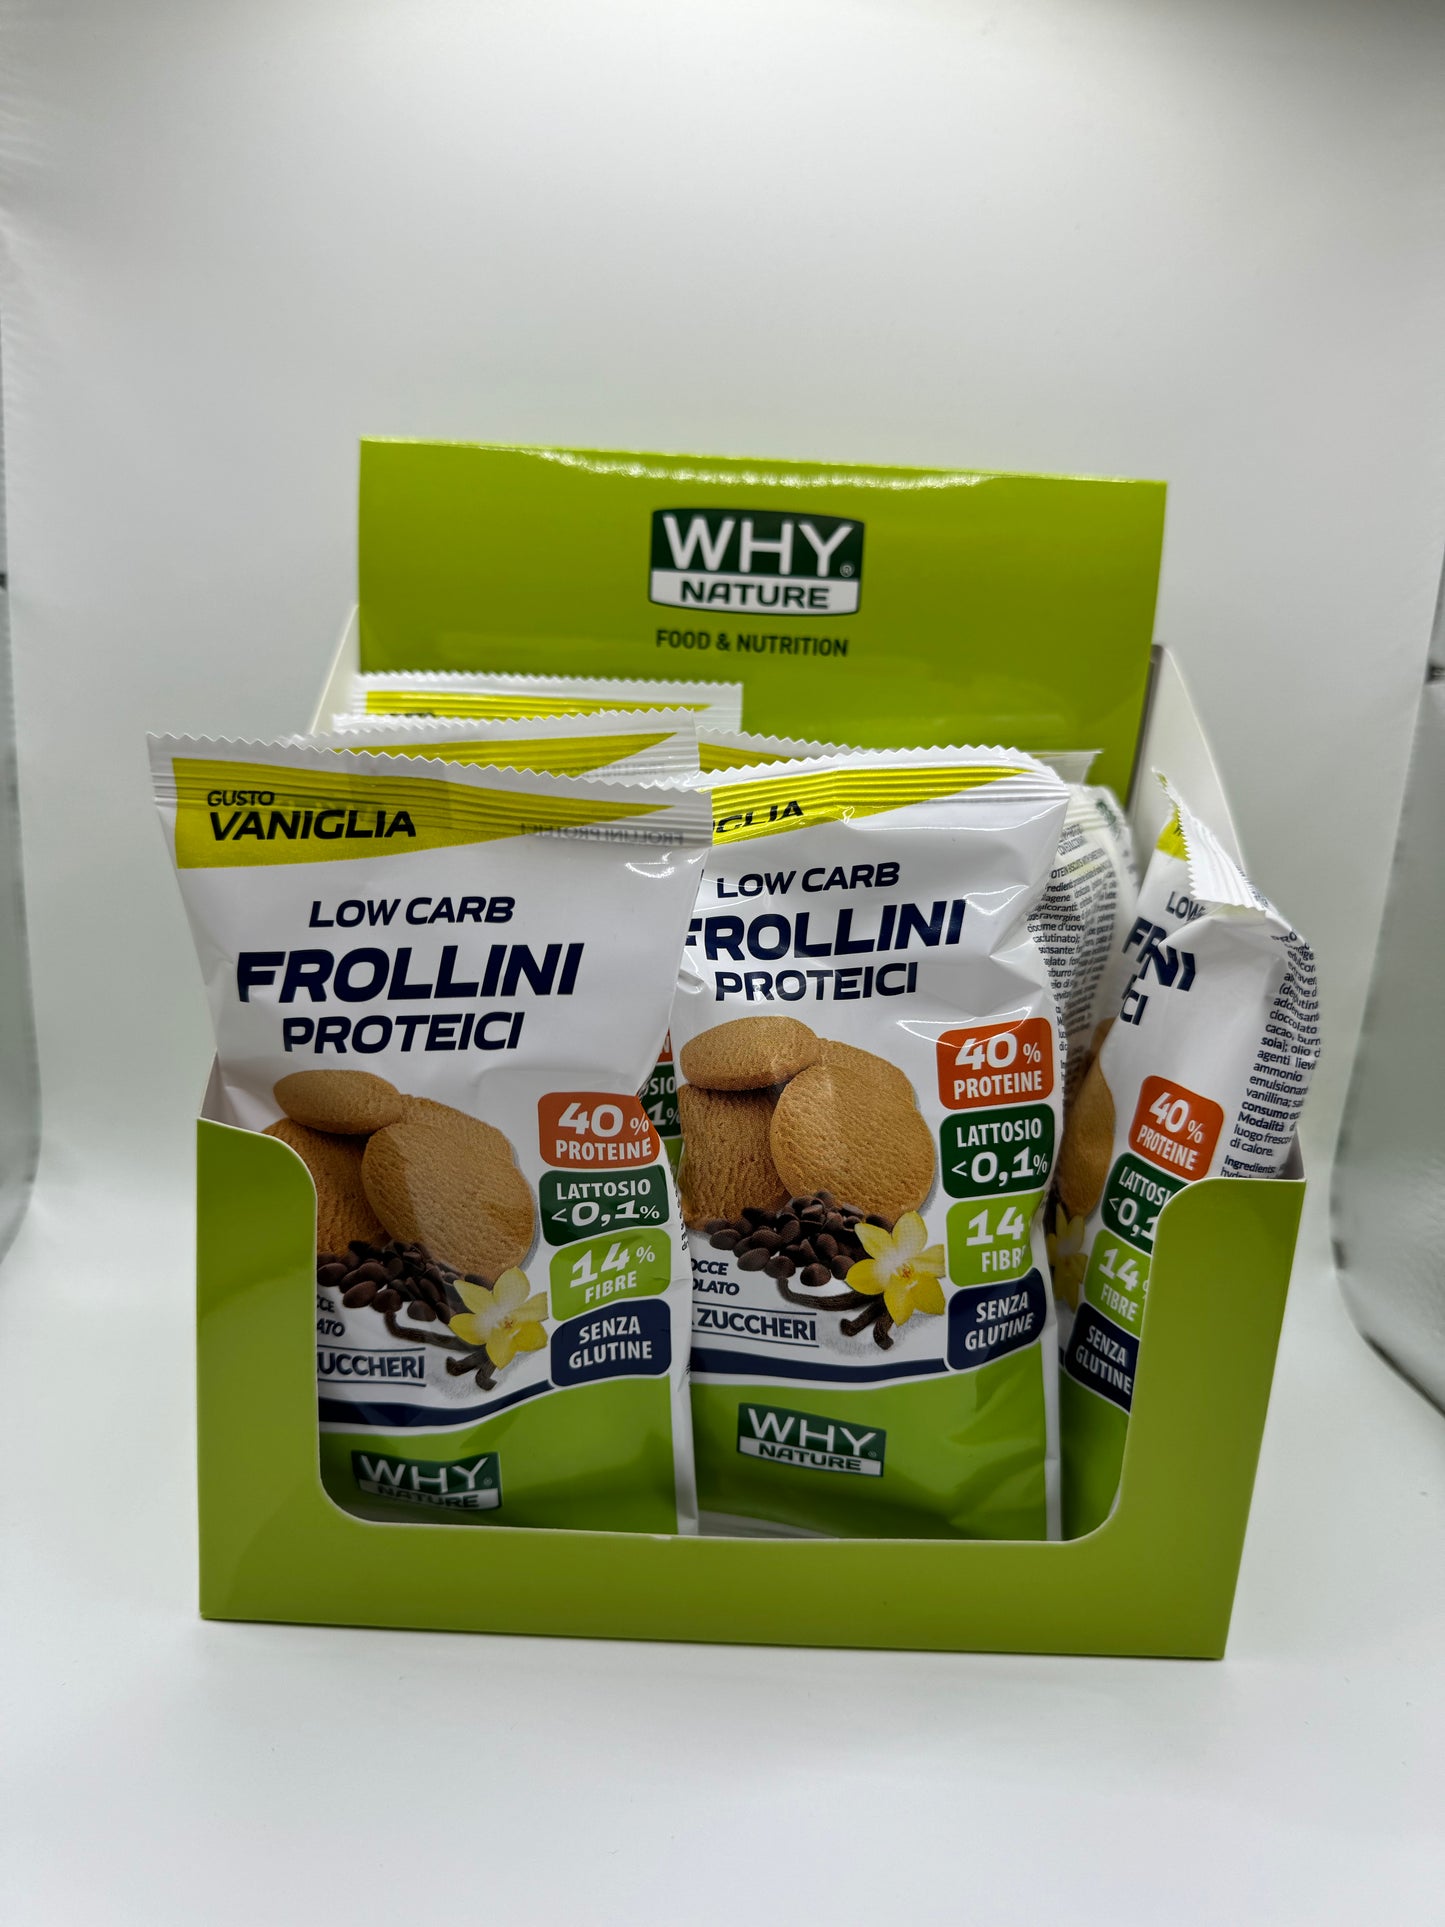 LOW CARB FROLLINI PROTEICI WHYNATURE